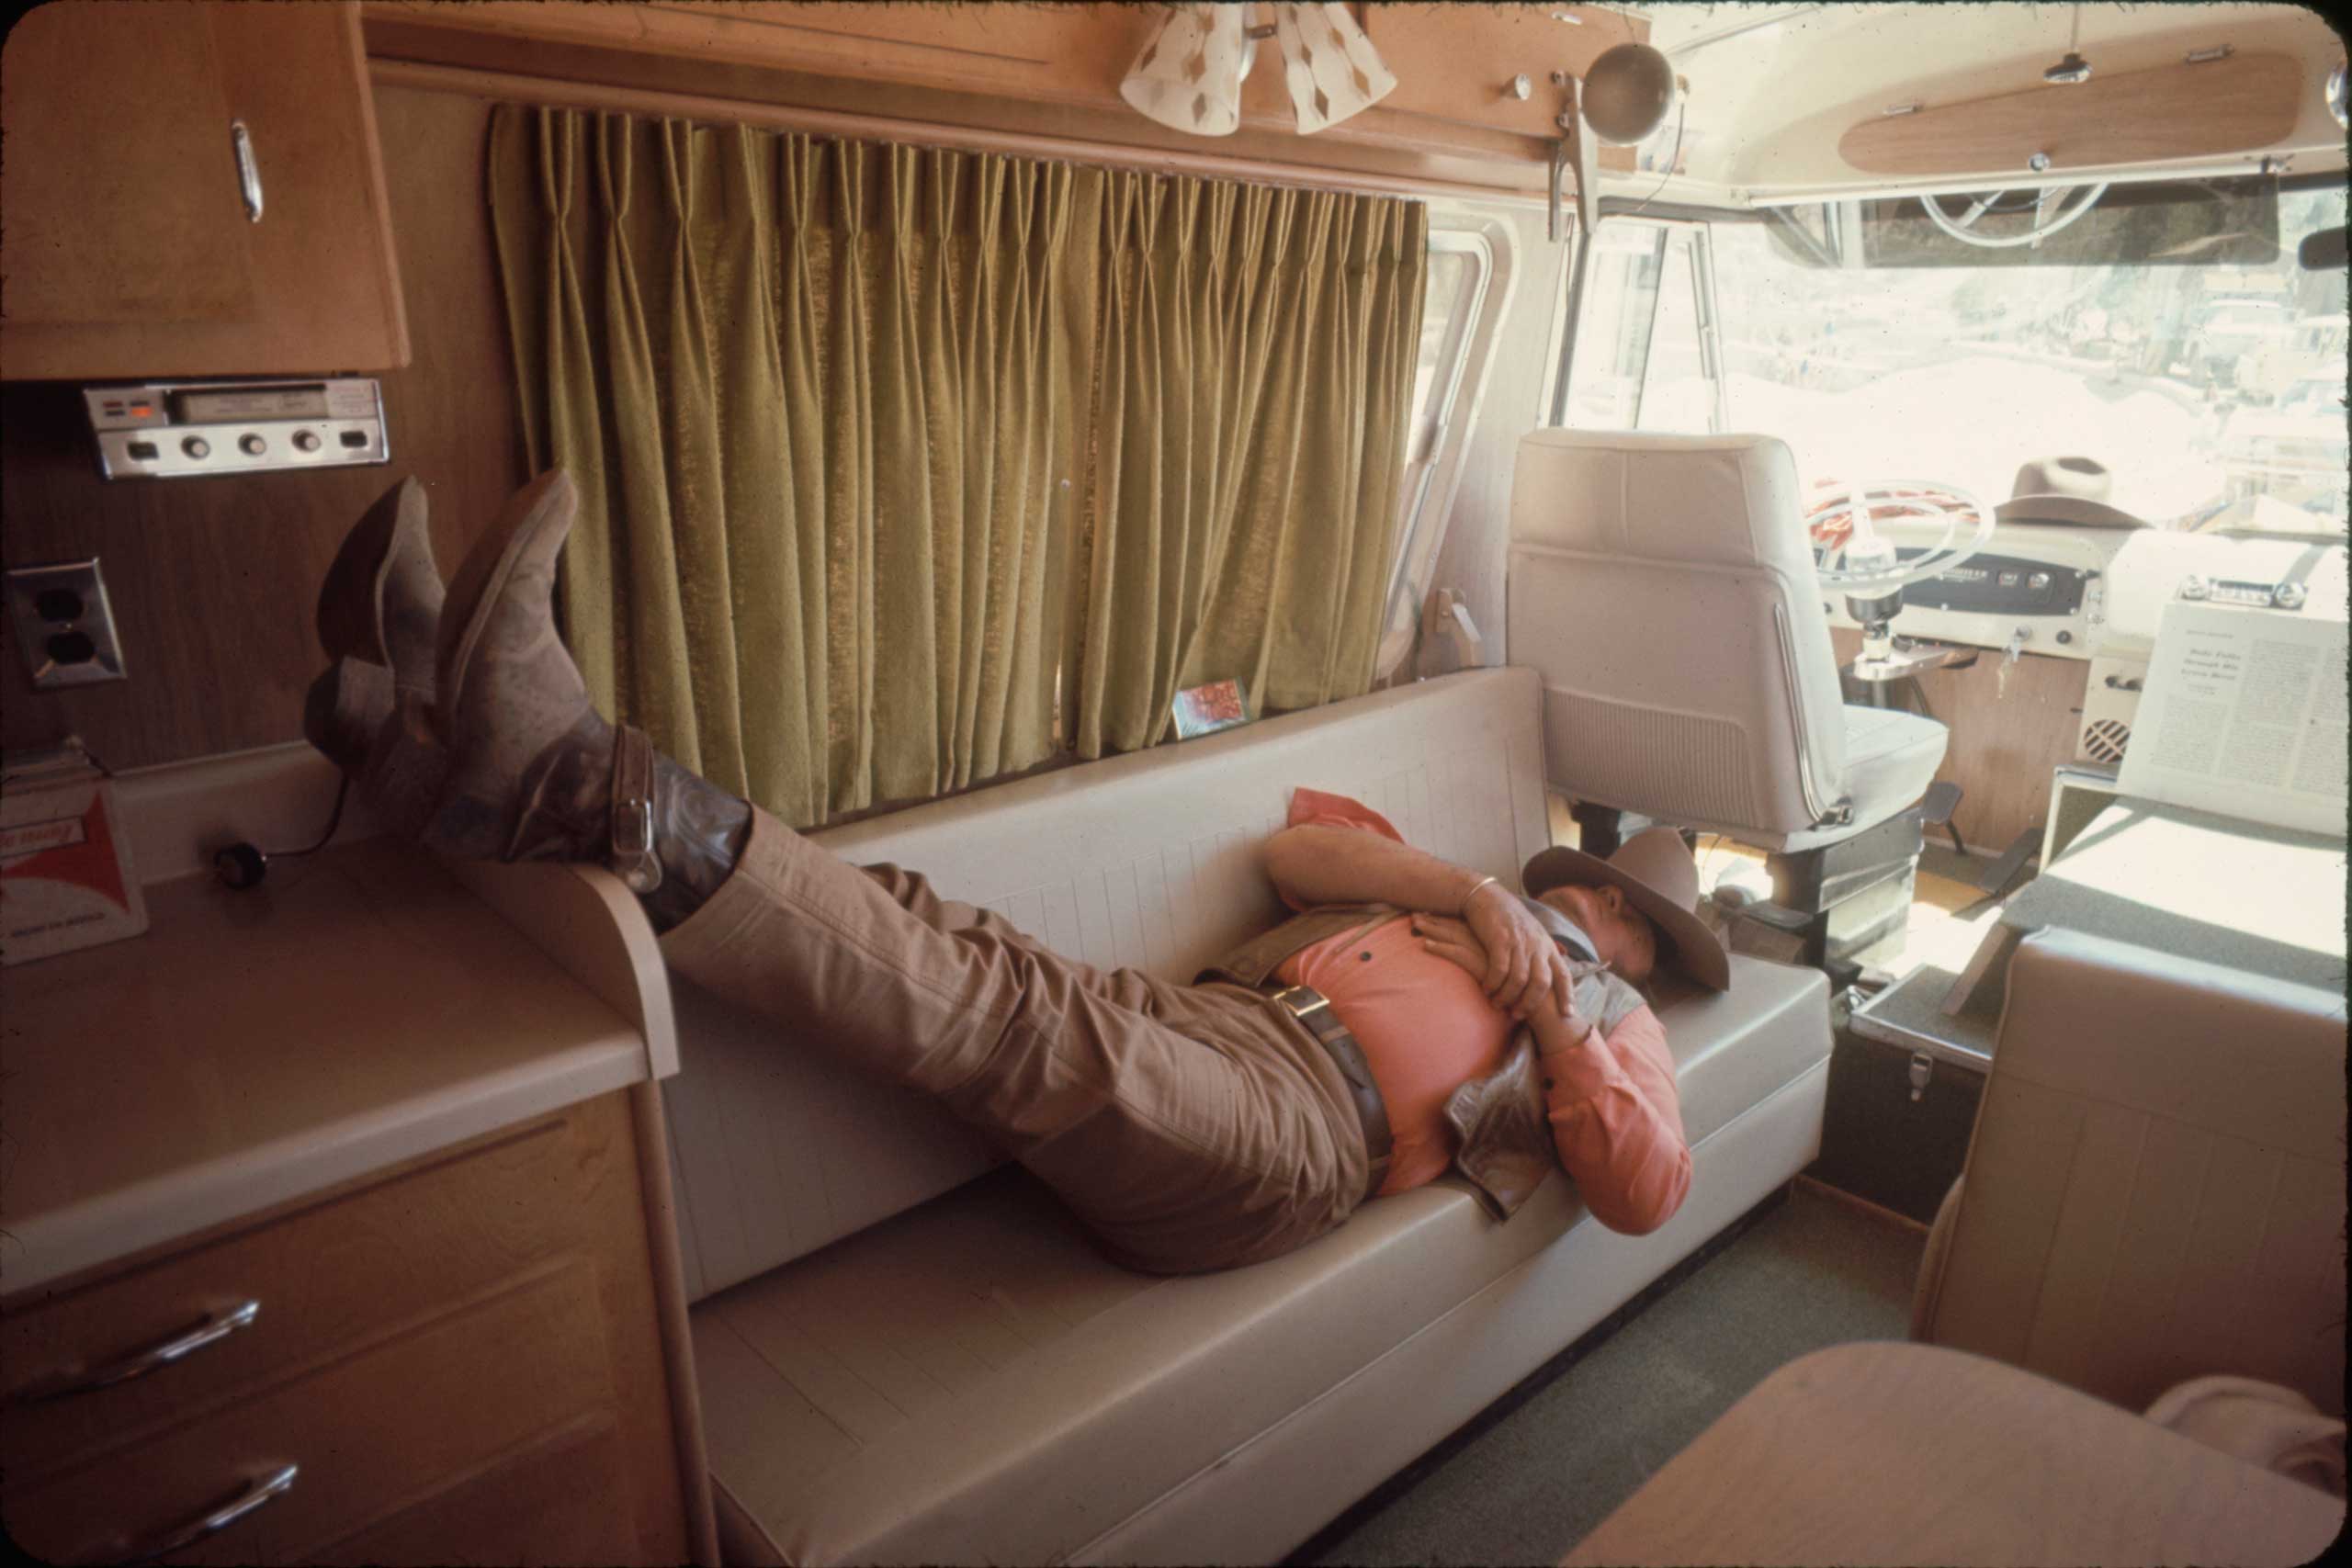 John Wayne takes a break during the filming of 'The Undefeated', 1969